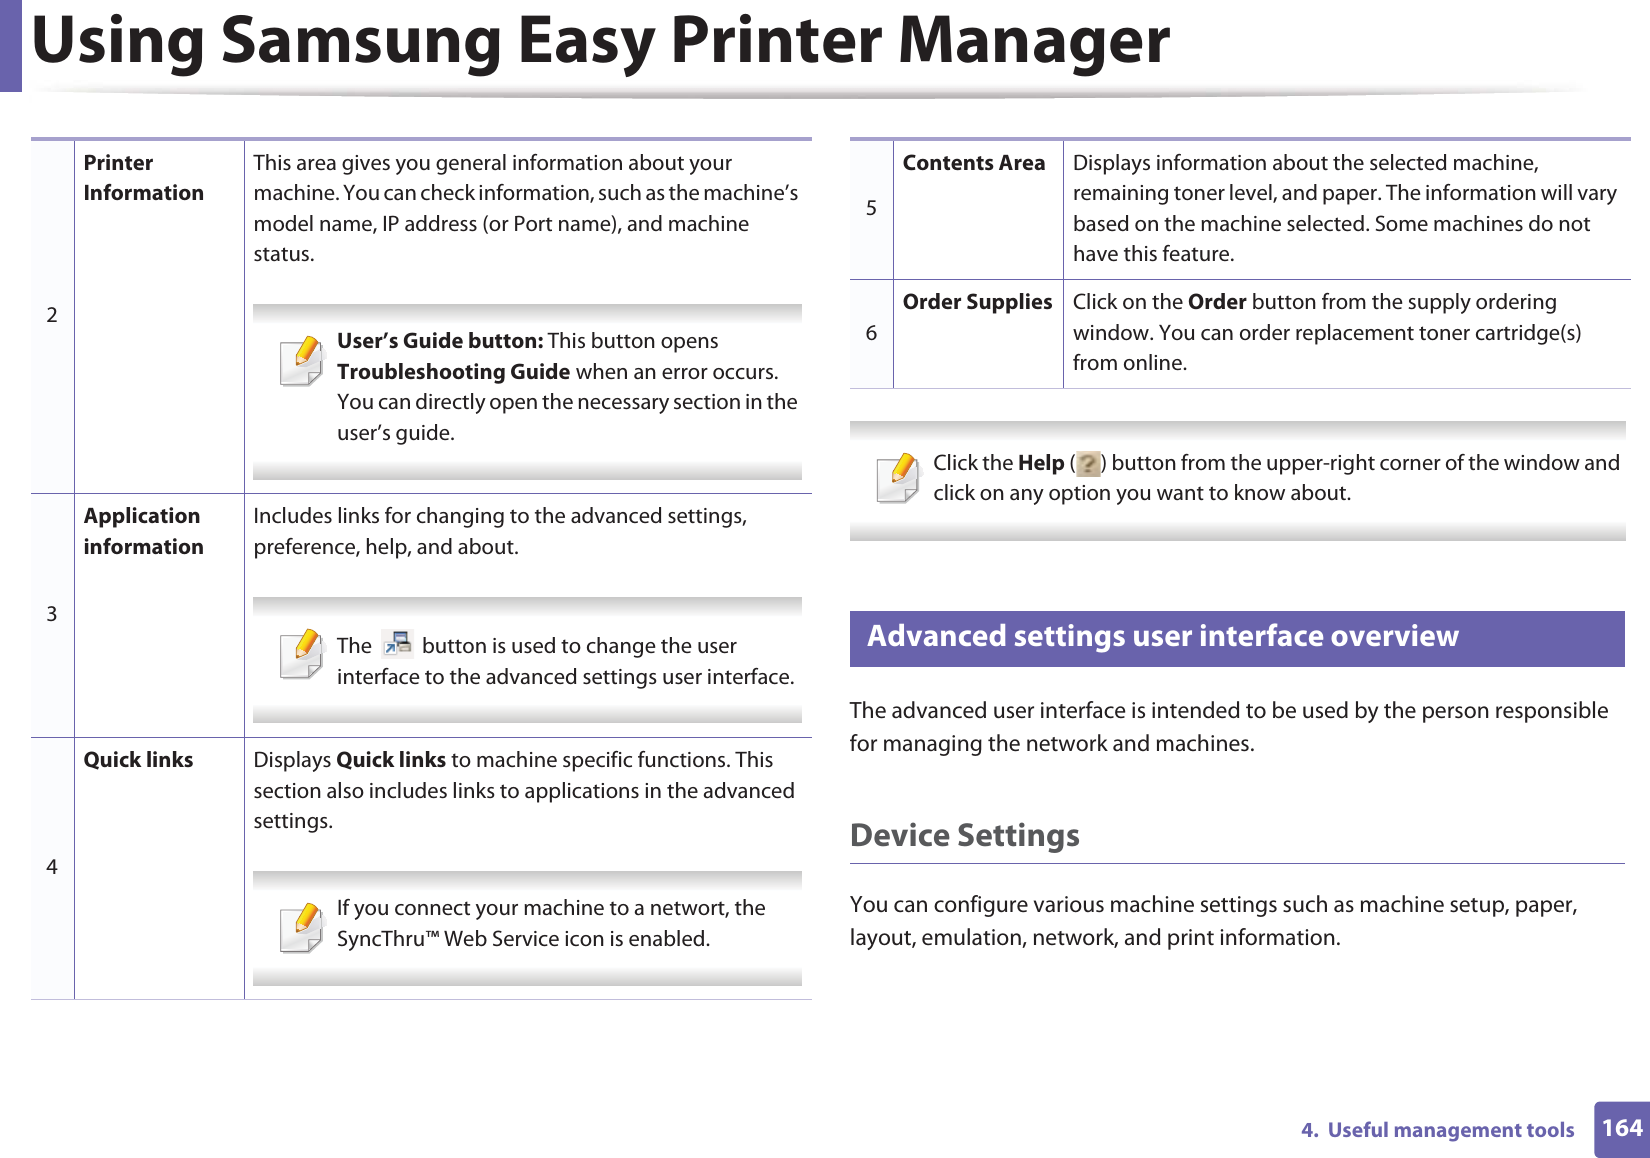 Using Samsung Easy Printer Manager1644.  Useful management tools Click the Help ( ) button from the upper-right corner of the window and click on any option you want to know about.  6 Advanced settings user interface overviewThe advanced user interface is intended to be used by the person responsible for managing the network and machines.Device SettingsYou can configure various machine settings such as machine setup, paper, layout, emulation, network, and print information.2Printer InformationThis area gives you general information about your machine. You can check information, such as the machine’s model name, IP address (or Port name), and machine status. User’s Guide button: This button opens Troubleshooting Guide when an error occurs. You can directly open the necessary section in the user’s guide.  3Application informationIncludes links for changing to the advanced settings, preference, help, and about. The   button is used to change the user interface to the advanced settings user interface. 4Quick links Displays Quick links to machine specific functions. This section also includes links to applications in the advanced settings. If you connect your machine to a networt, the SyncThru™ Web Service icon is enabled. 5Contents Area Displays information about the selected machine, remaining toner level, and paper. The information will vary based on the machine selected. Some machines do not have this feature.6Order Supplies Click on the Order button from the supply ordering window. You can order replacement toner cartridge(s) from online.